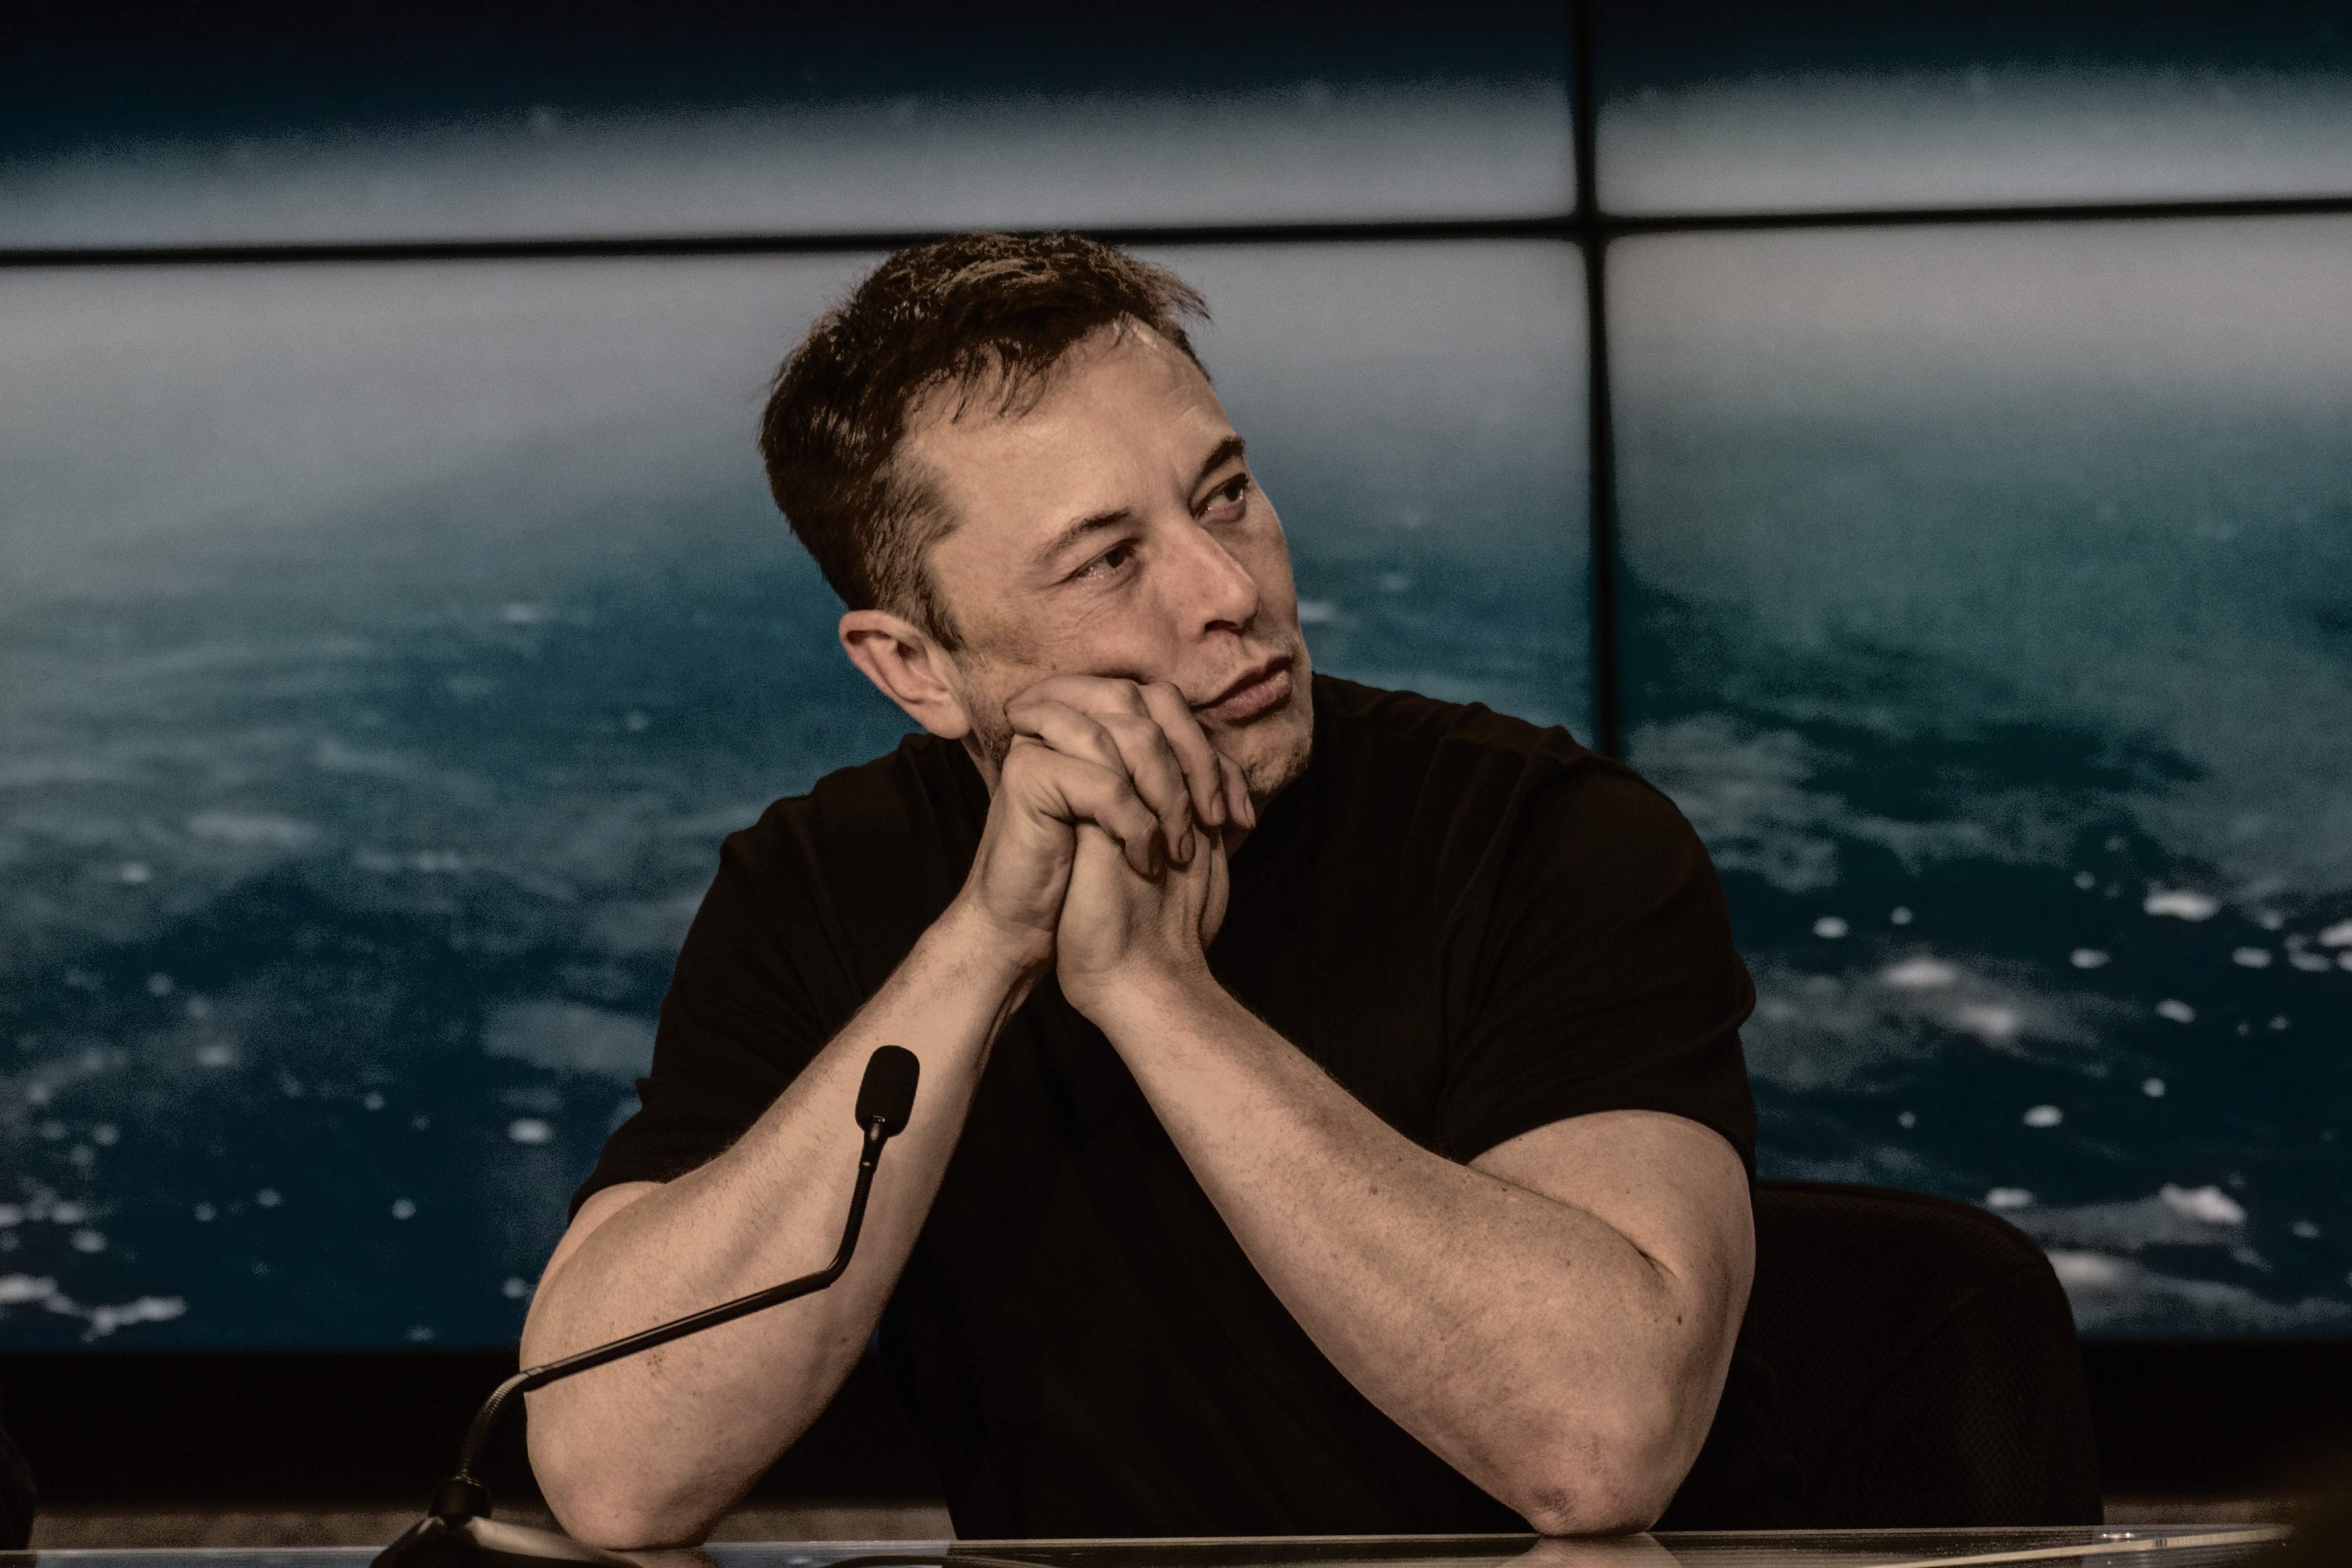 Elon Musk tried to negotiate a downgrade on the deal before agreeing to pay $44 billion.